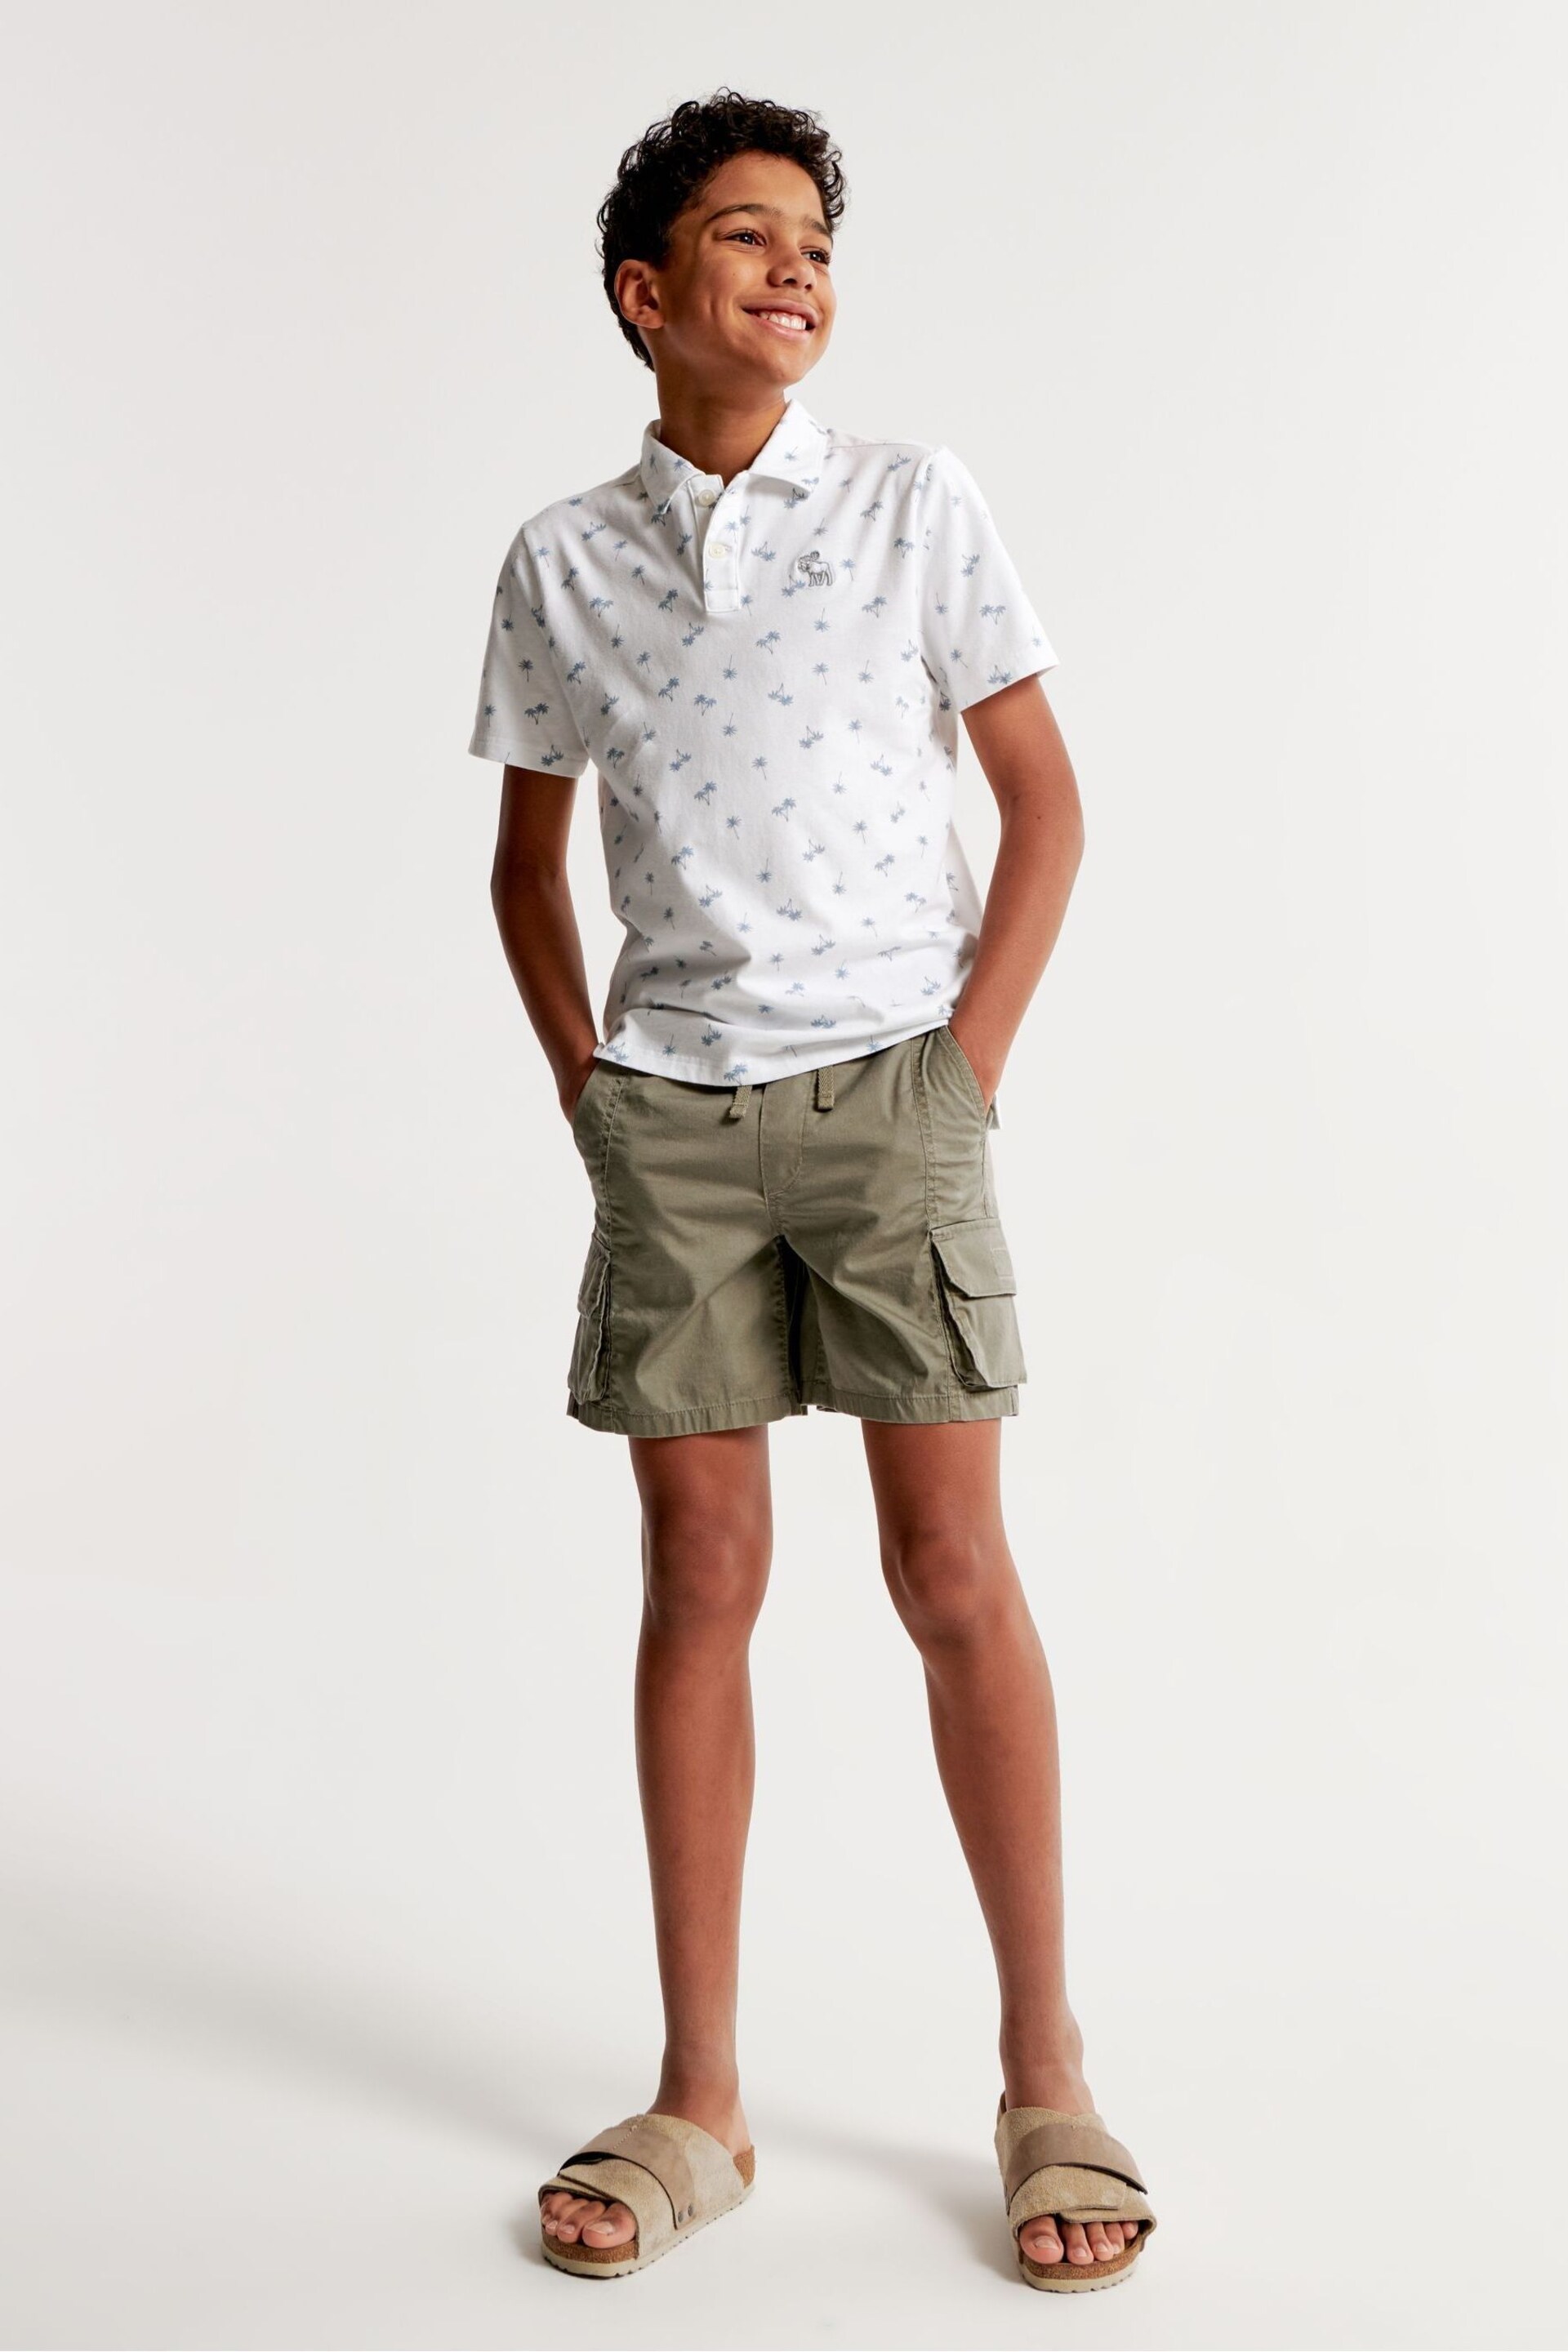 Abercrombie & Fitch Printed White Polo Shirt - Image 4 of 8